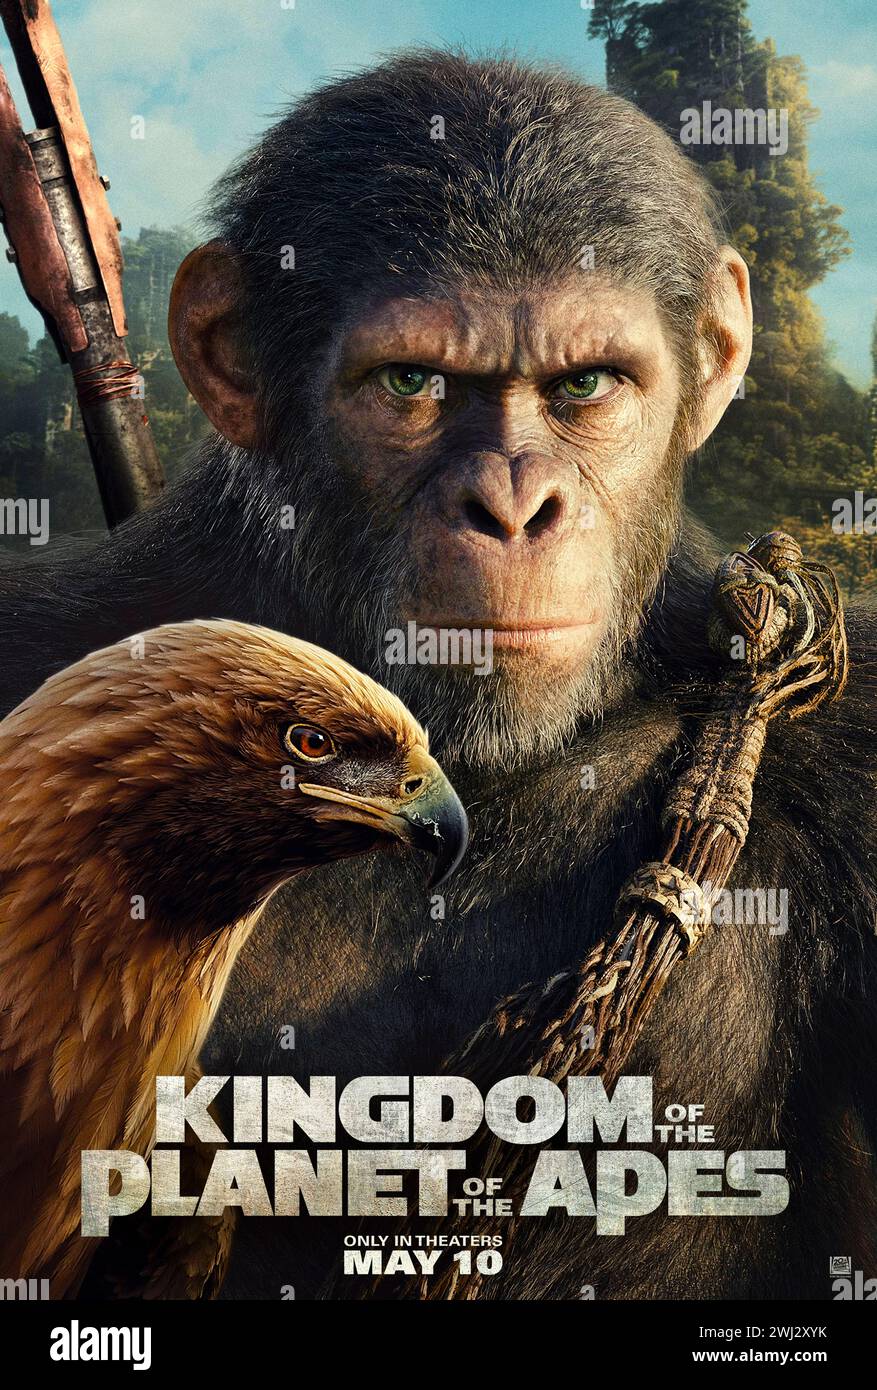 Kingdom of the Planet of the Apes (2024) directed by Wes Ball and starring Owen Teague as Noa, a common chimpanzee, who embarks on a harrowing journey alongside a young human named Nova to determine the future for apes and humans alike.. US character poster ***EDITORIAL USE ONLY***. Credit: BFA / Twentieth Century Studios Stock Photo